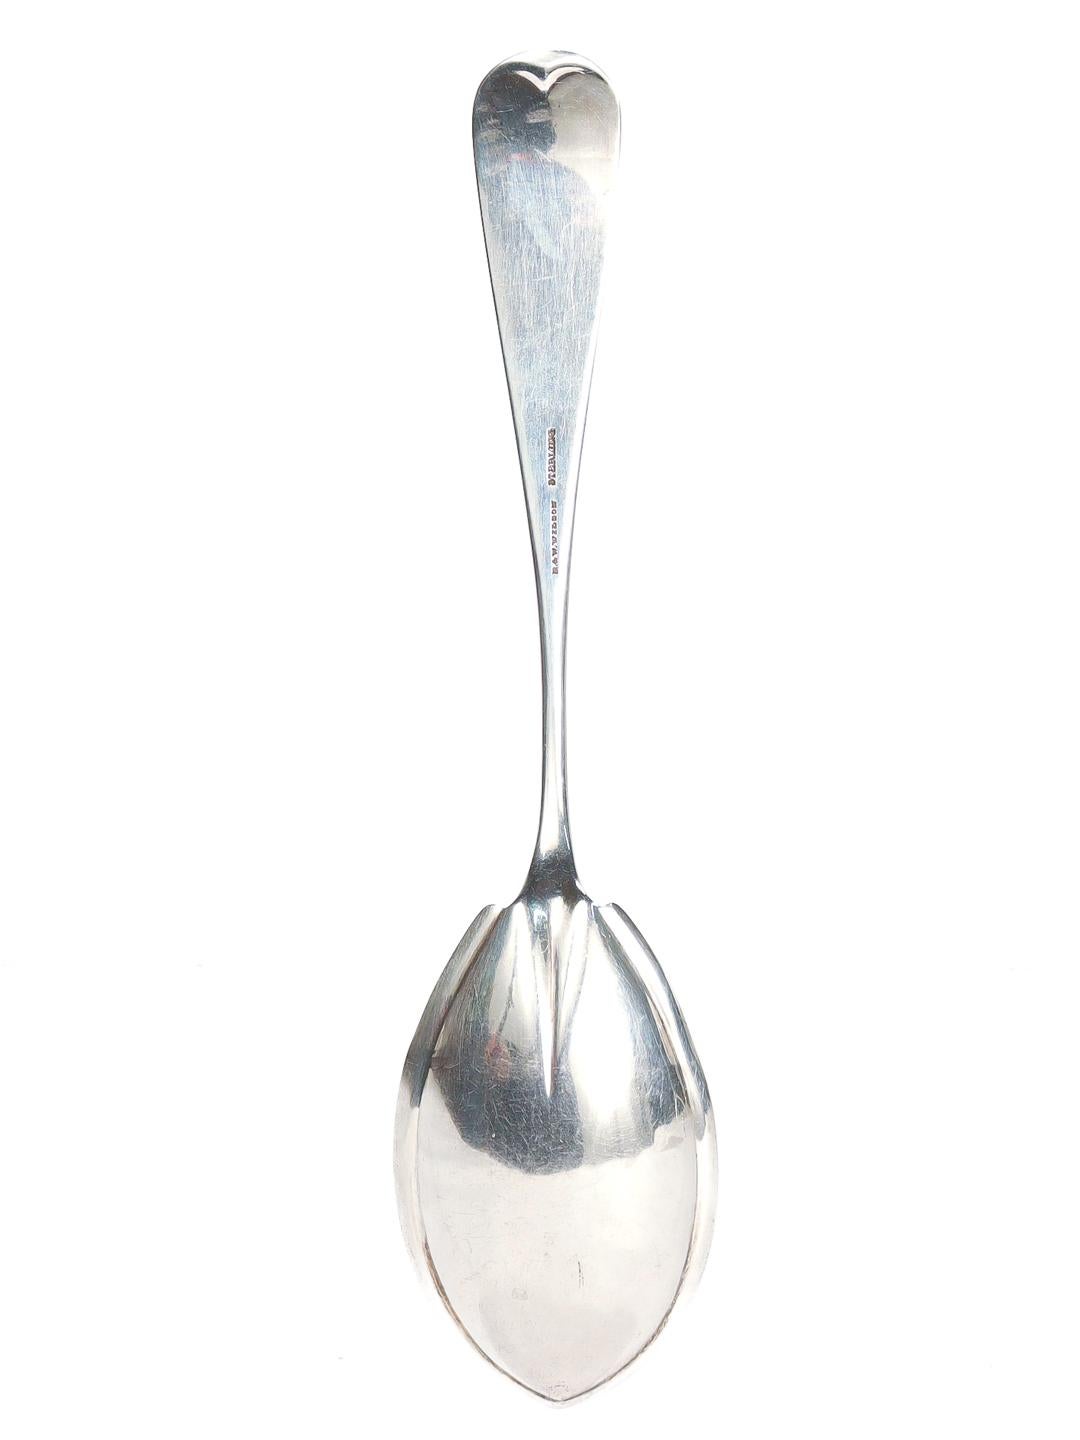 American Aesthetic Period R. & W. Wilson Brite Cut Sterling Silver Serving Spoon For Sale 8